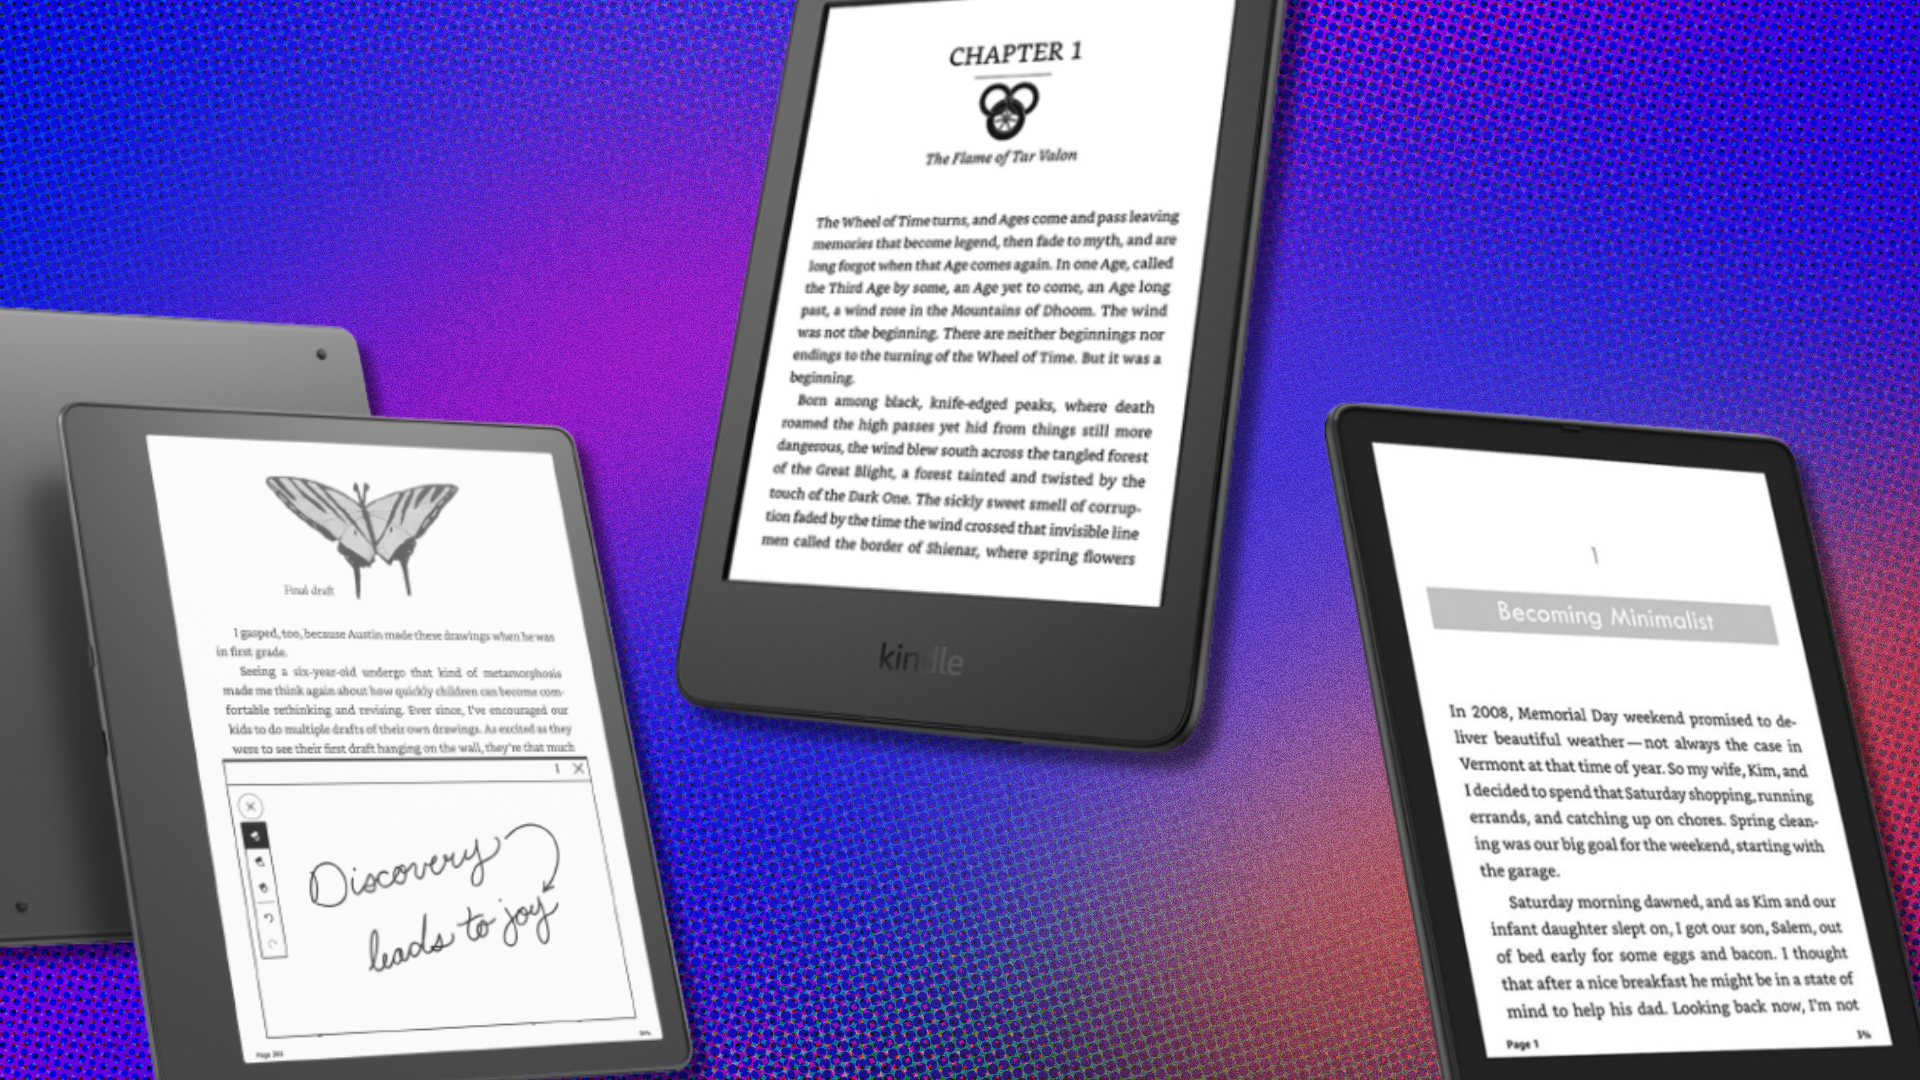 Three Kindle models from Amazon overlaid on a purplish-blue and textured background